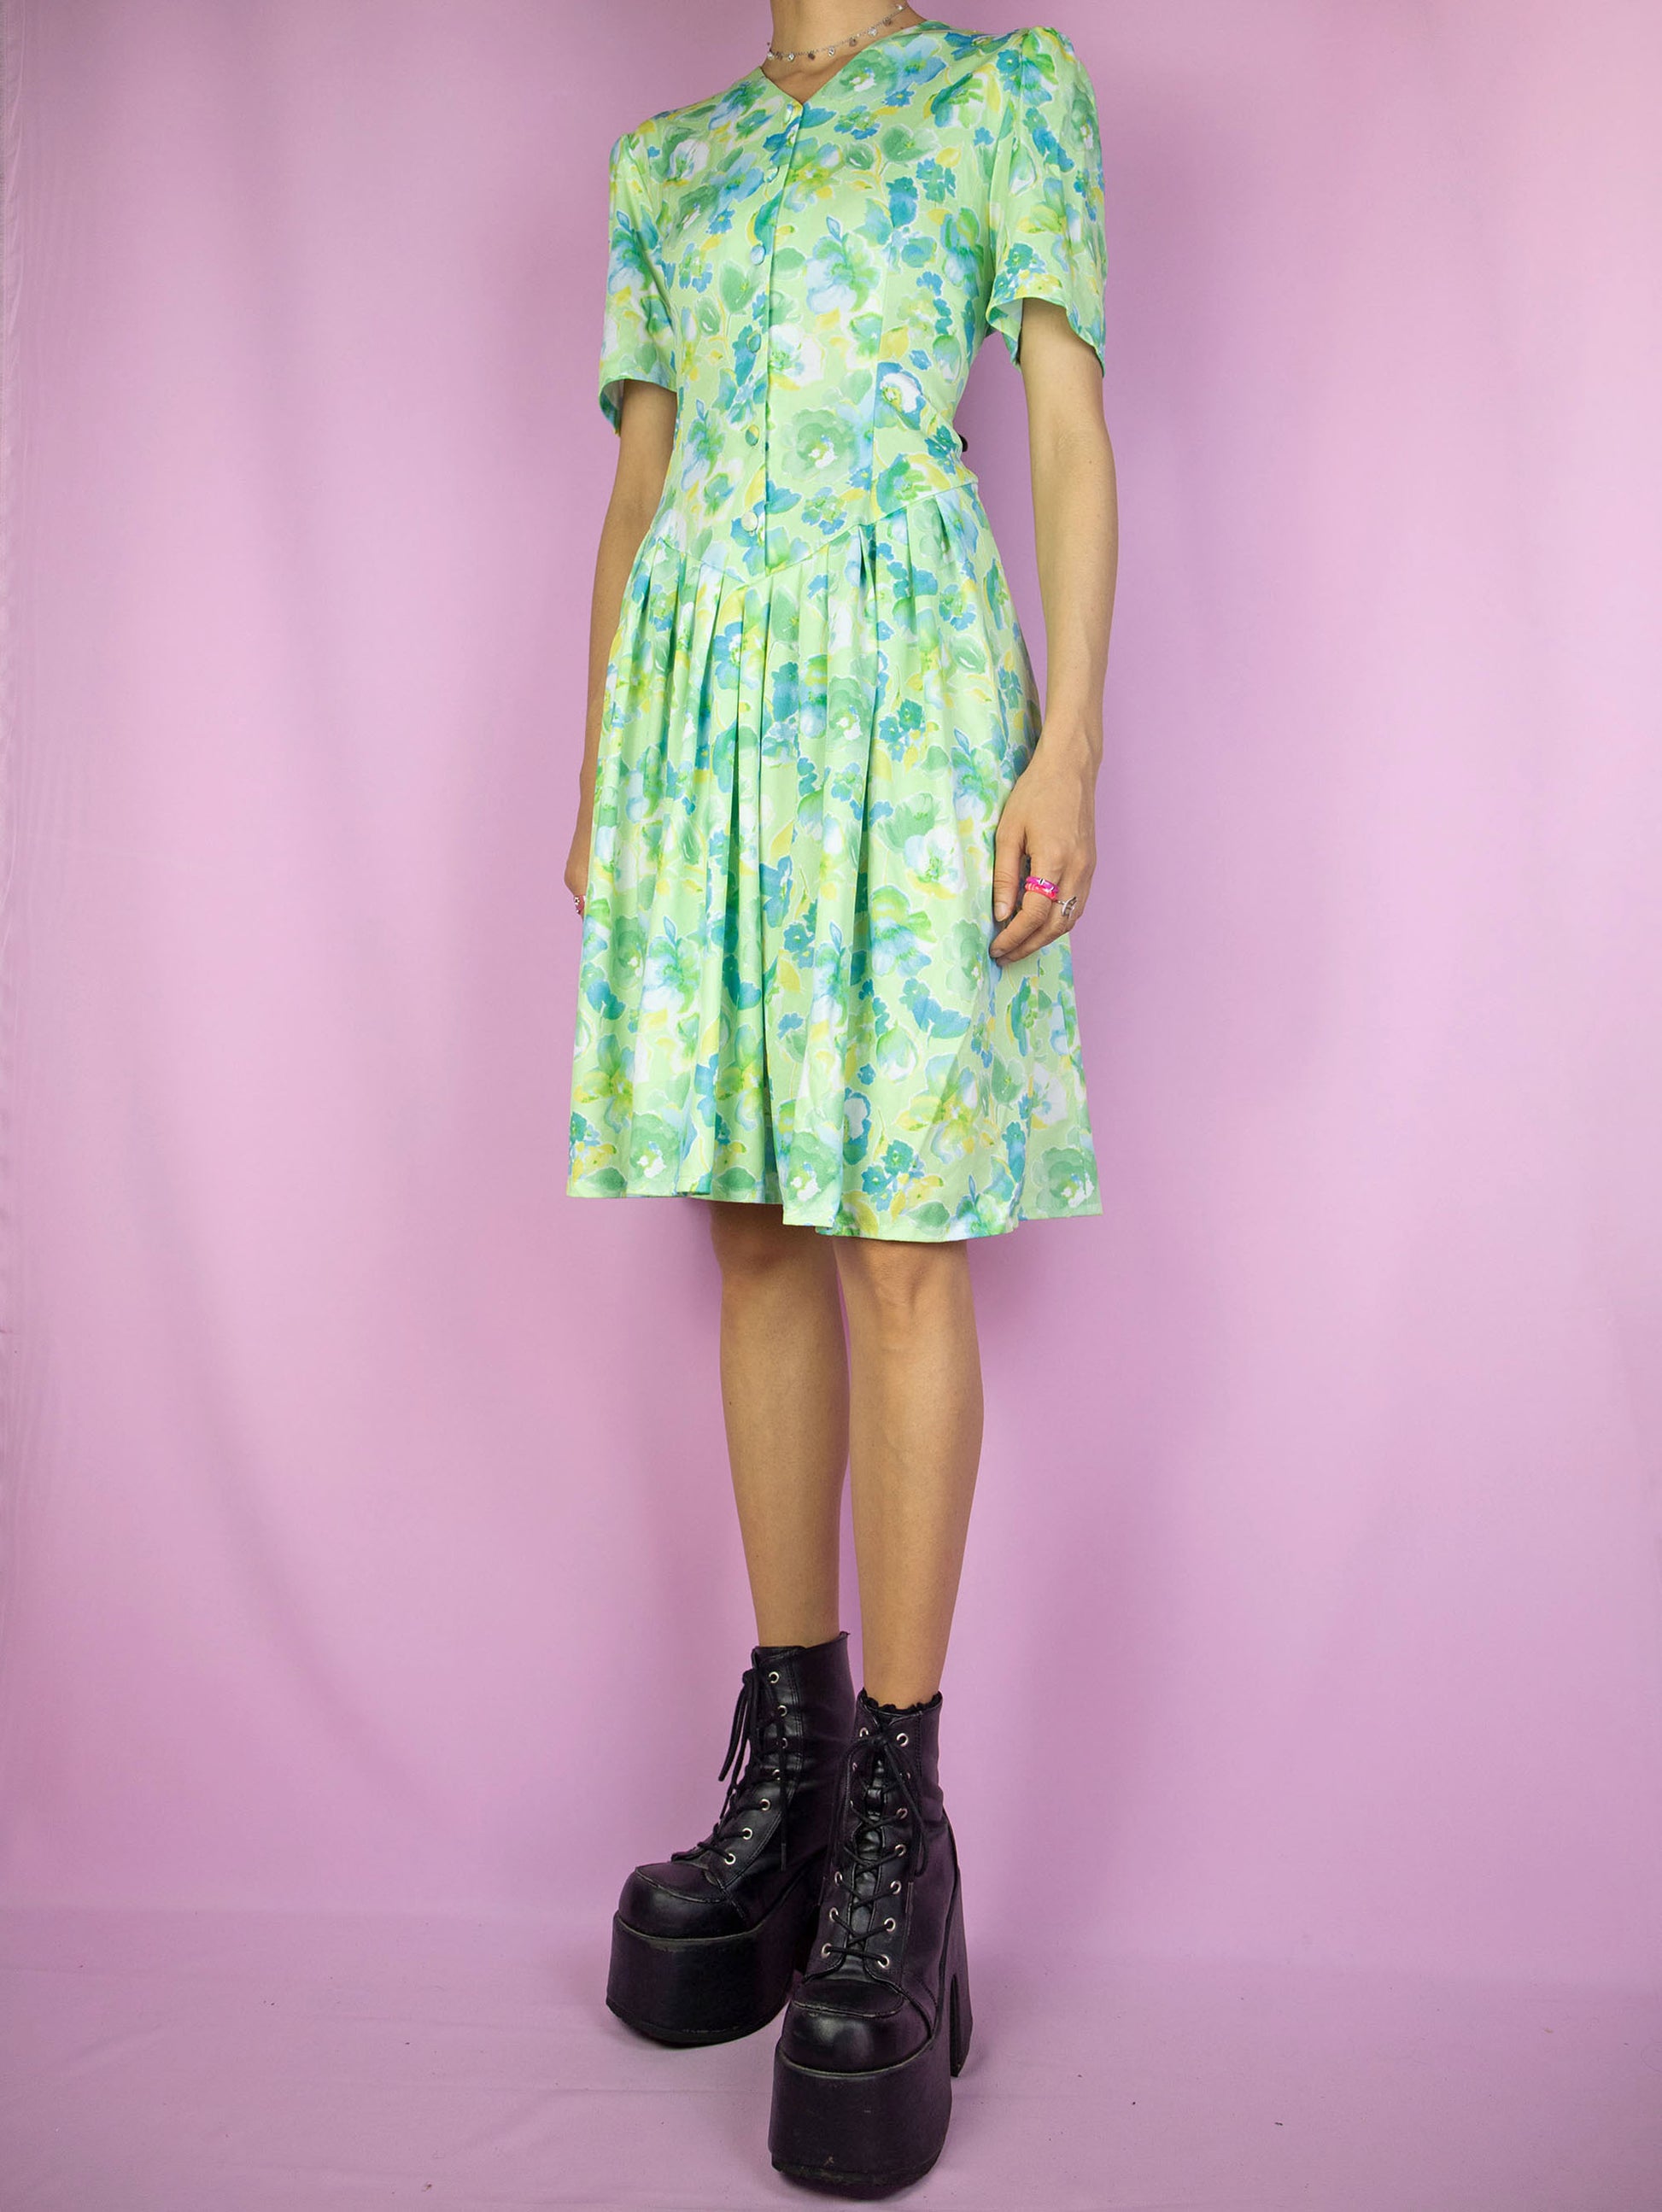 The Vintage 90s Retro Green Floral Dress is a light green blue and yellow floral short sleeve button pleated dress. Boho grunge 1990s summer mini dress.